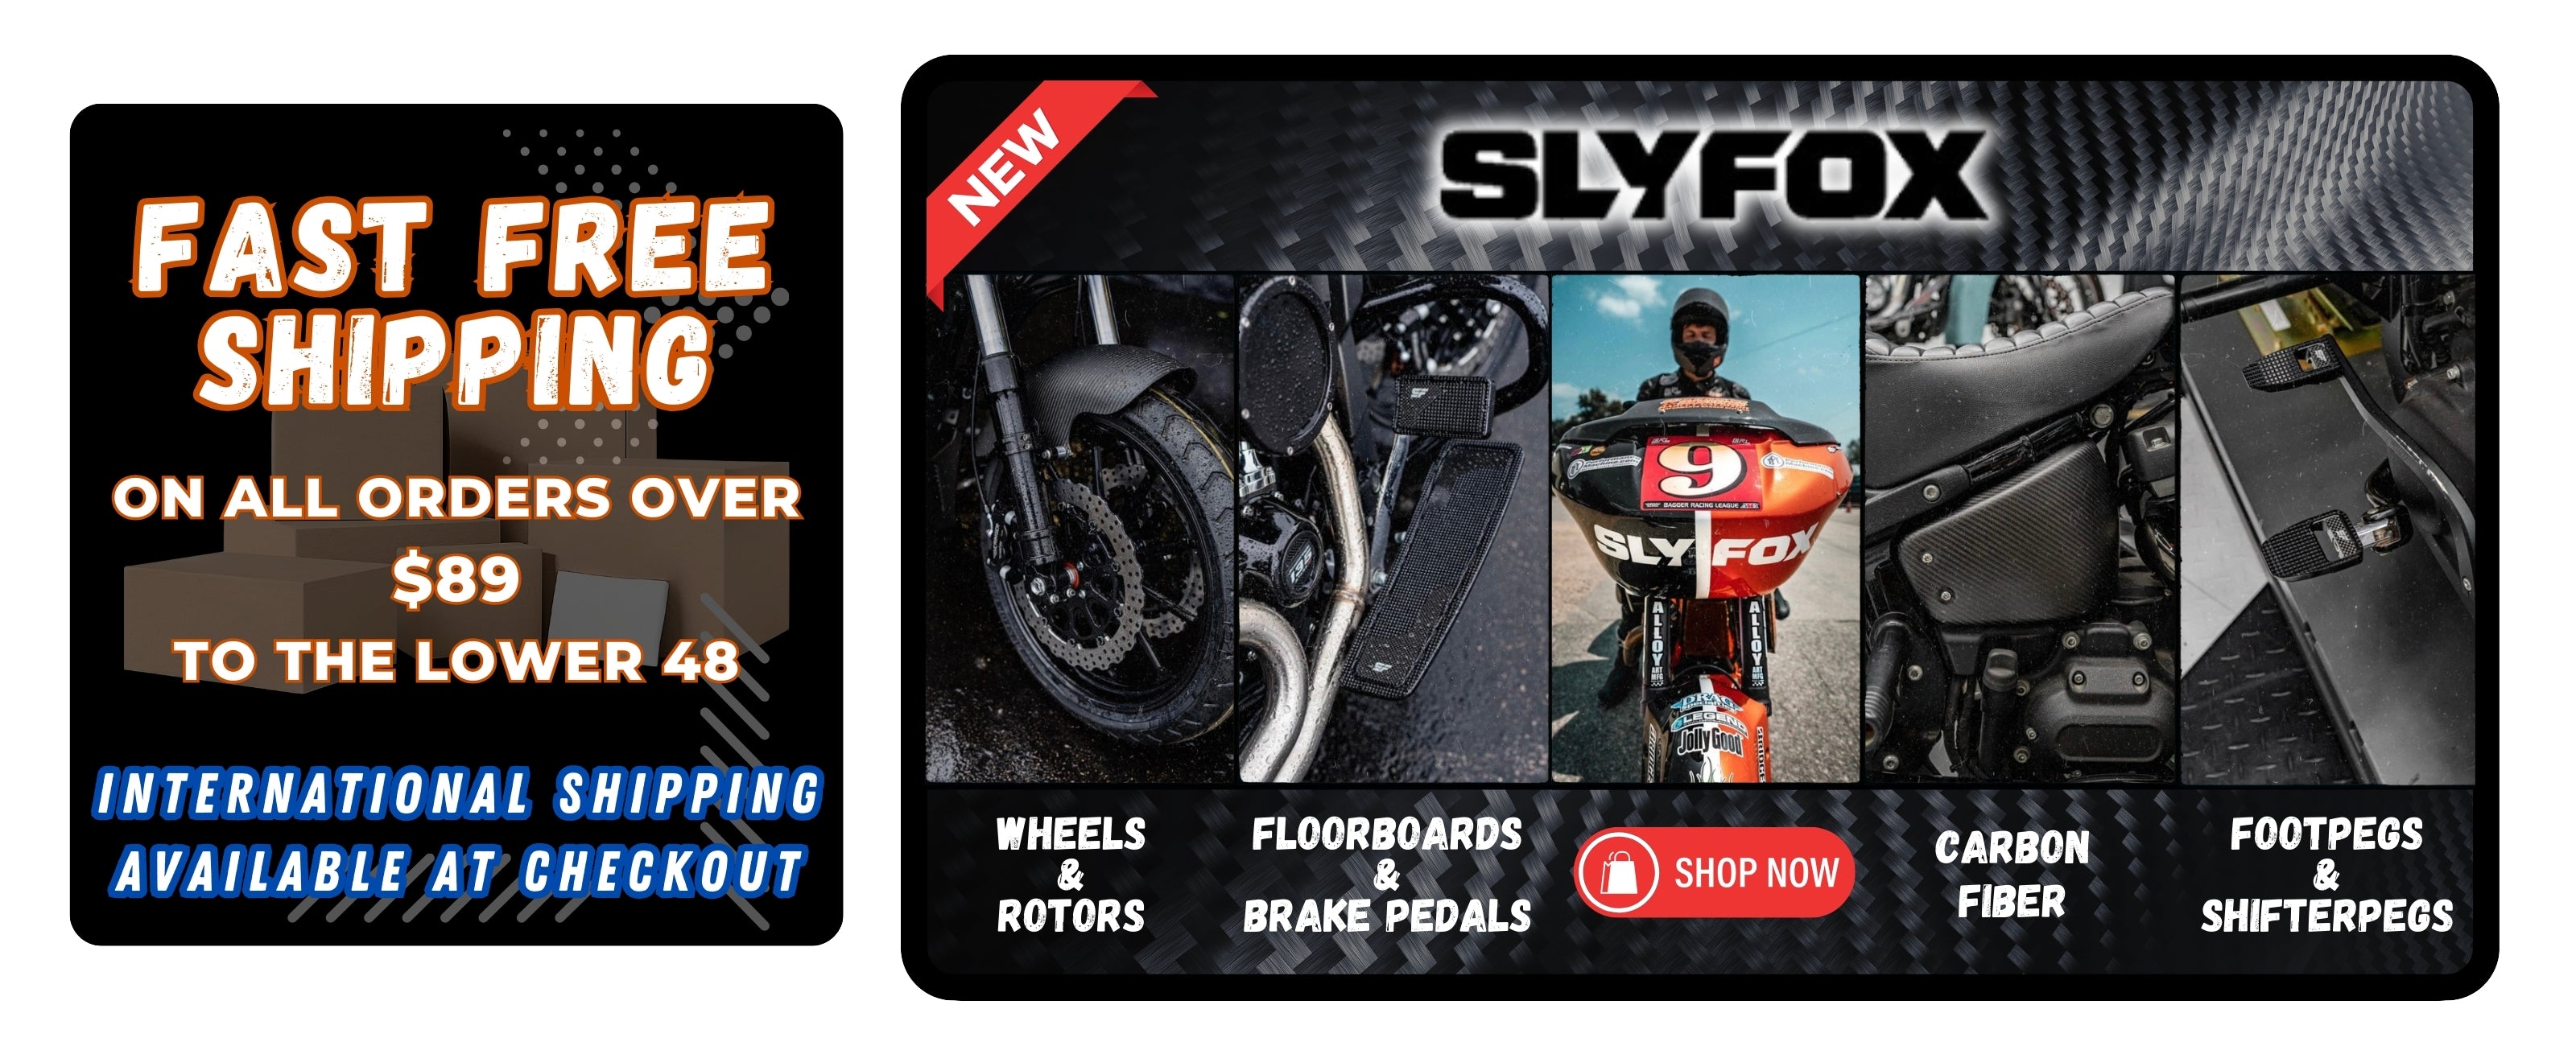 Slyfox Performance promotional banner displaying new racing parts from Slyfox, featuring a prominent "Shop Now" button and a side banner highlighting free shipping offers